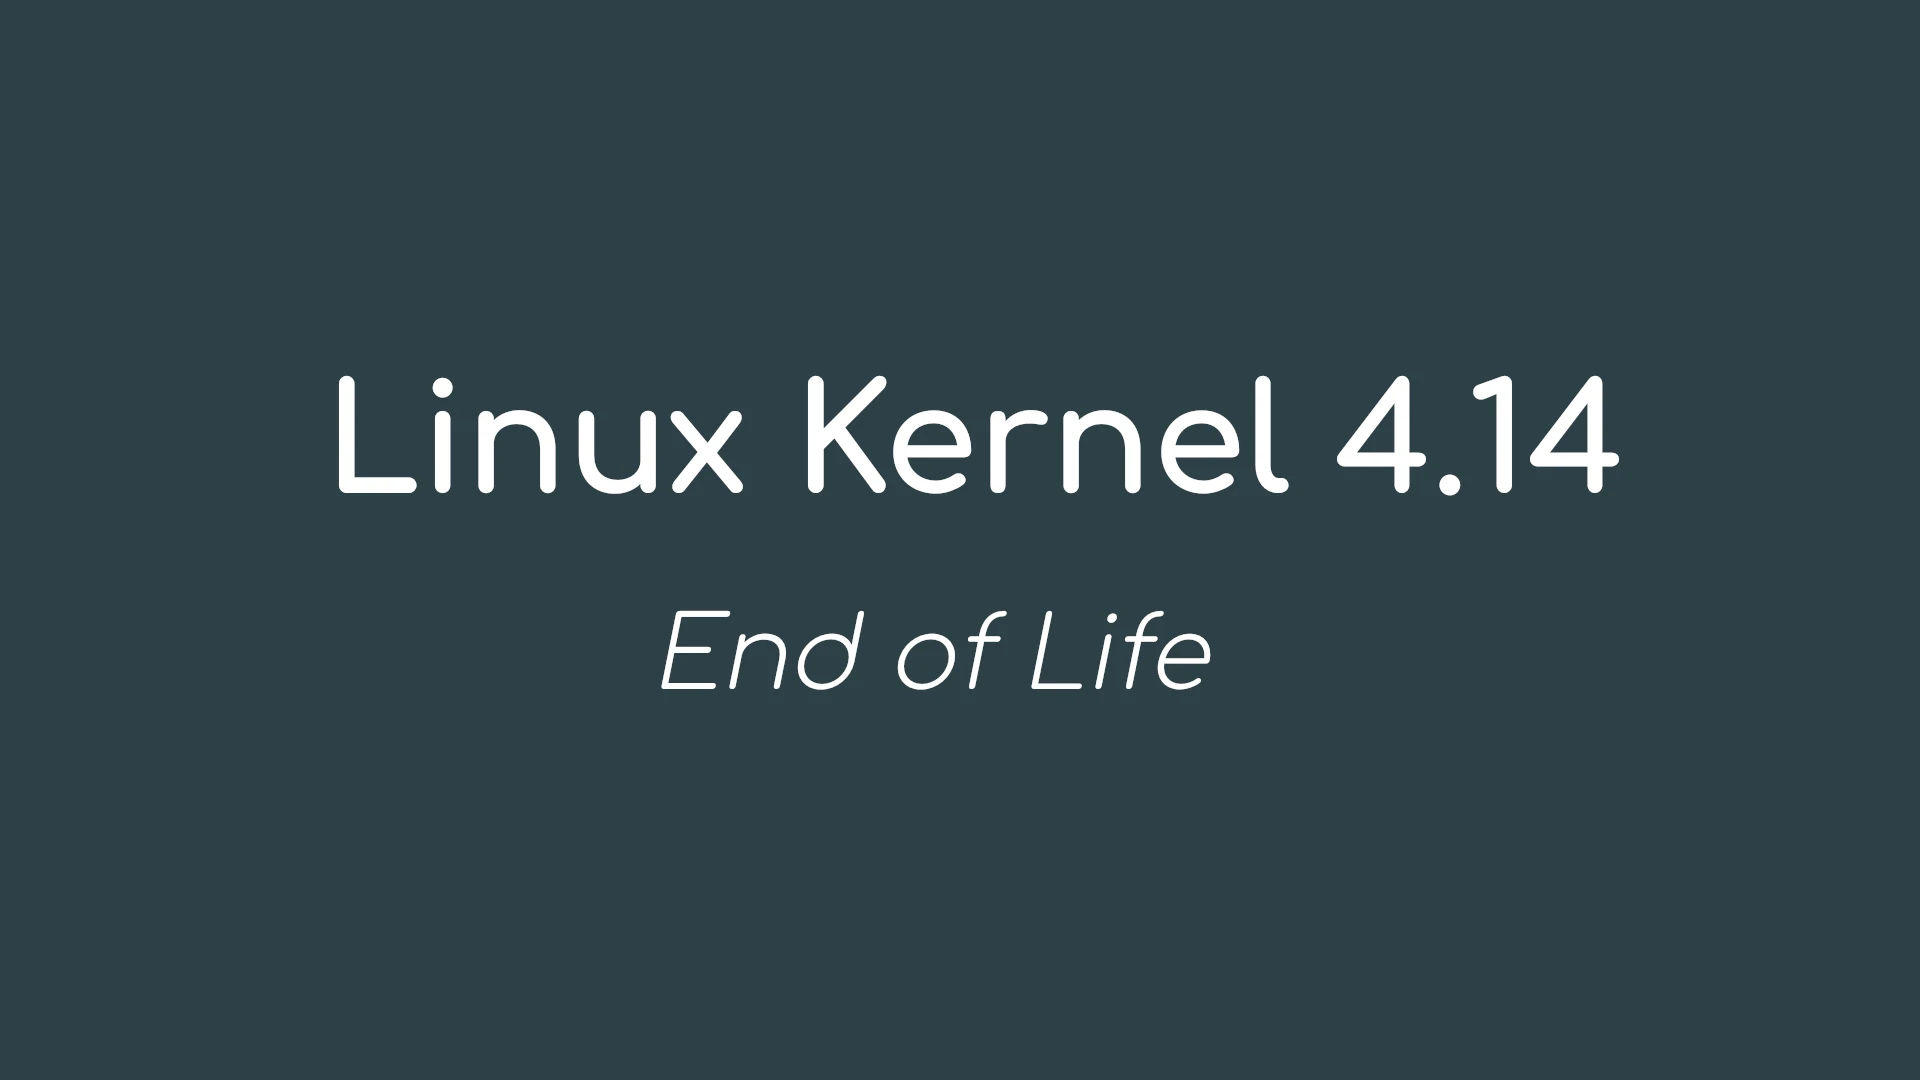 Linux Kernel 4.14 Reaches End of Life After More Than Six Years of Maintenance